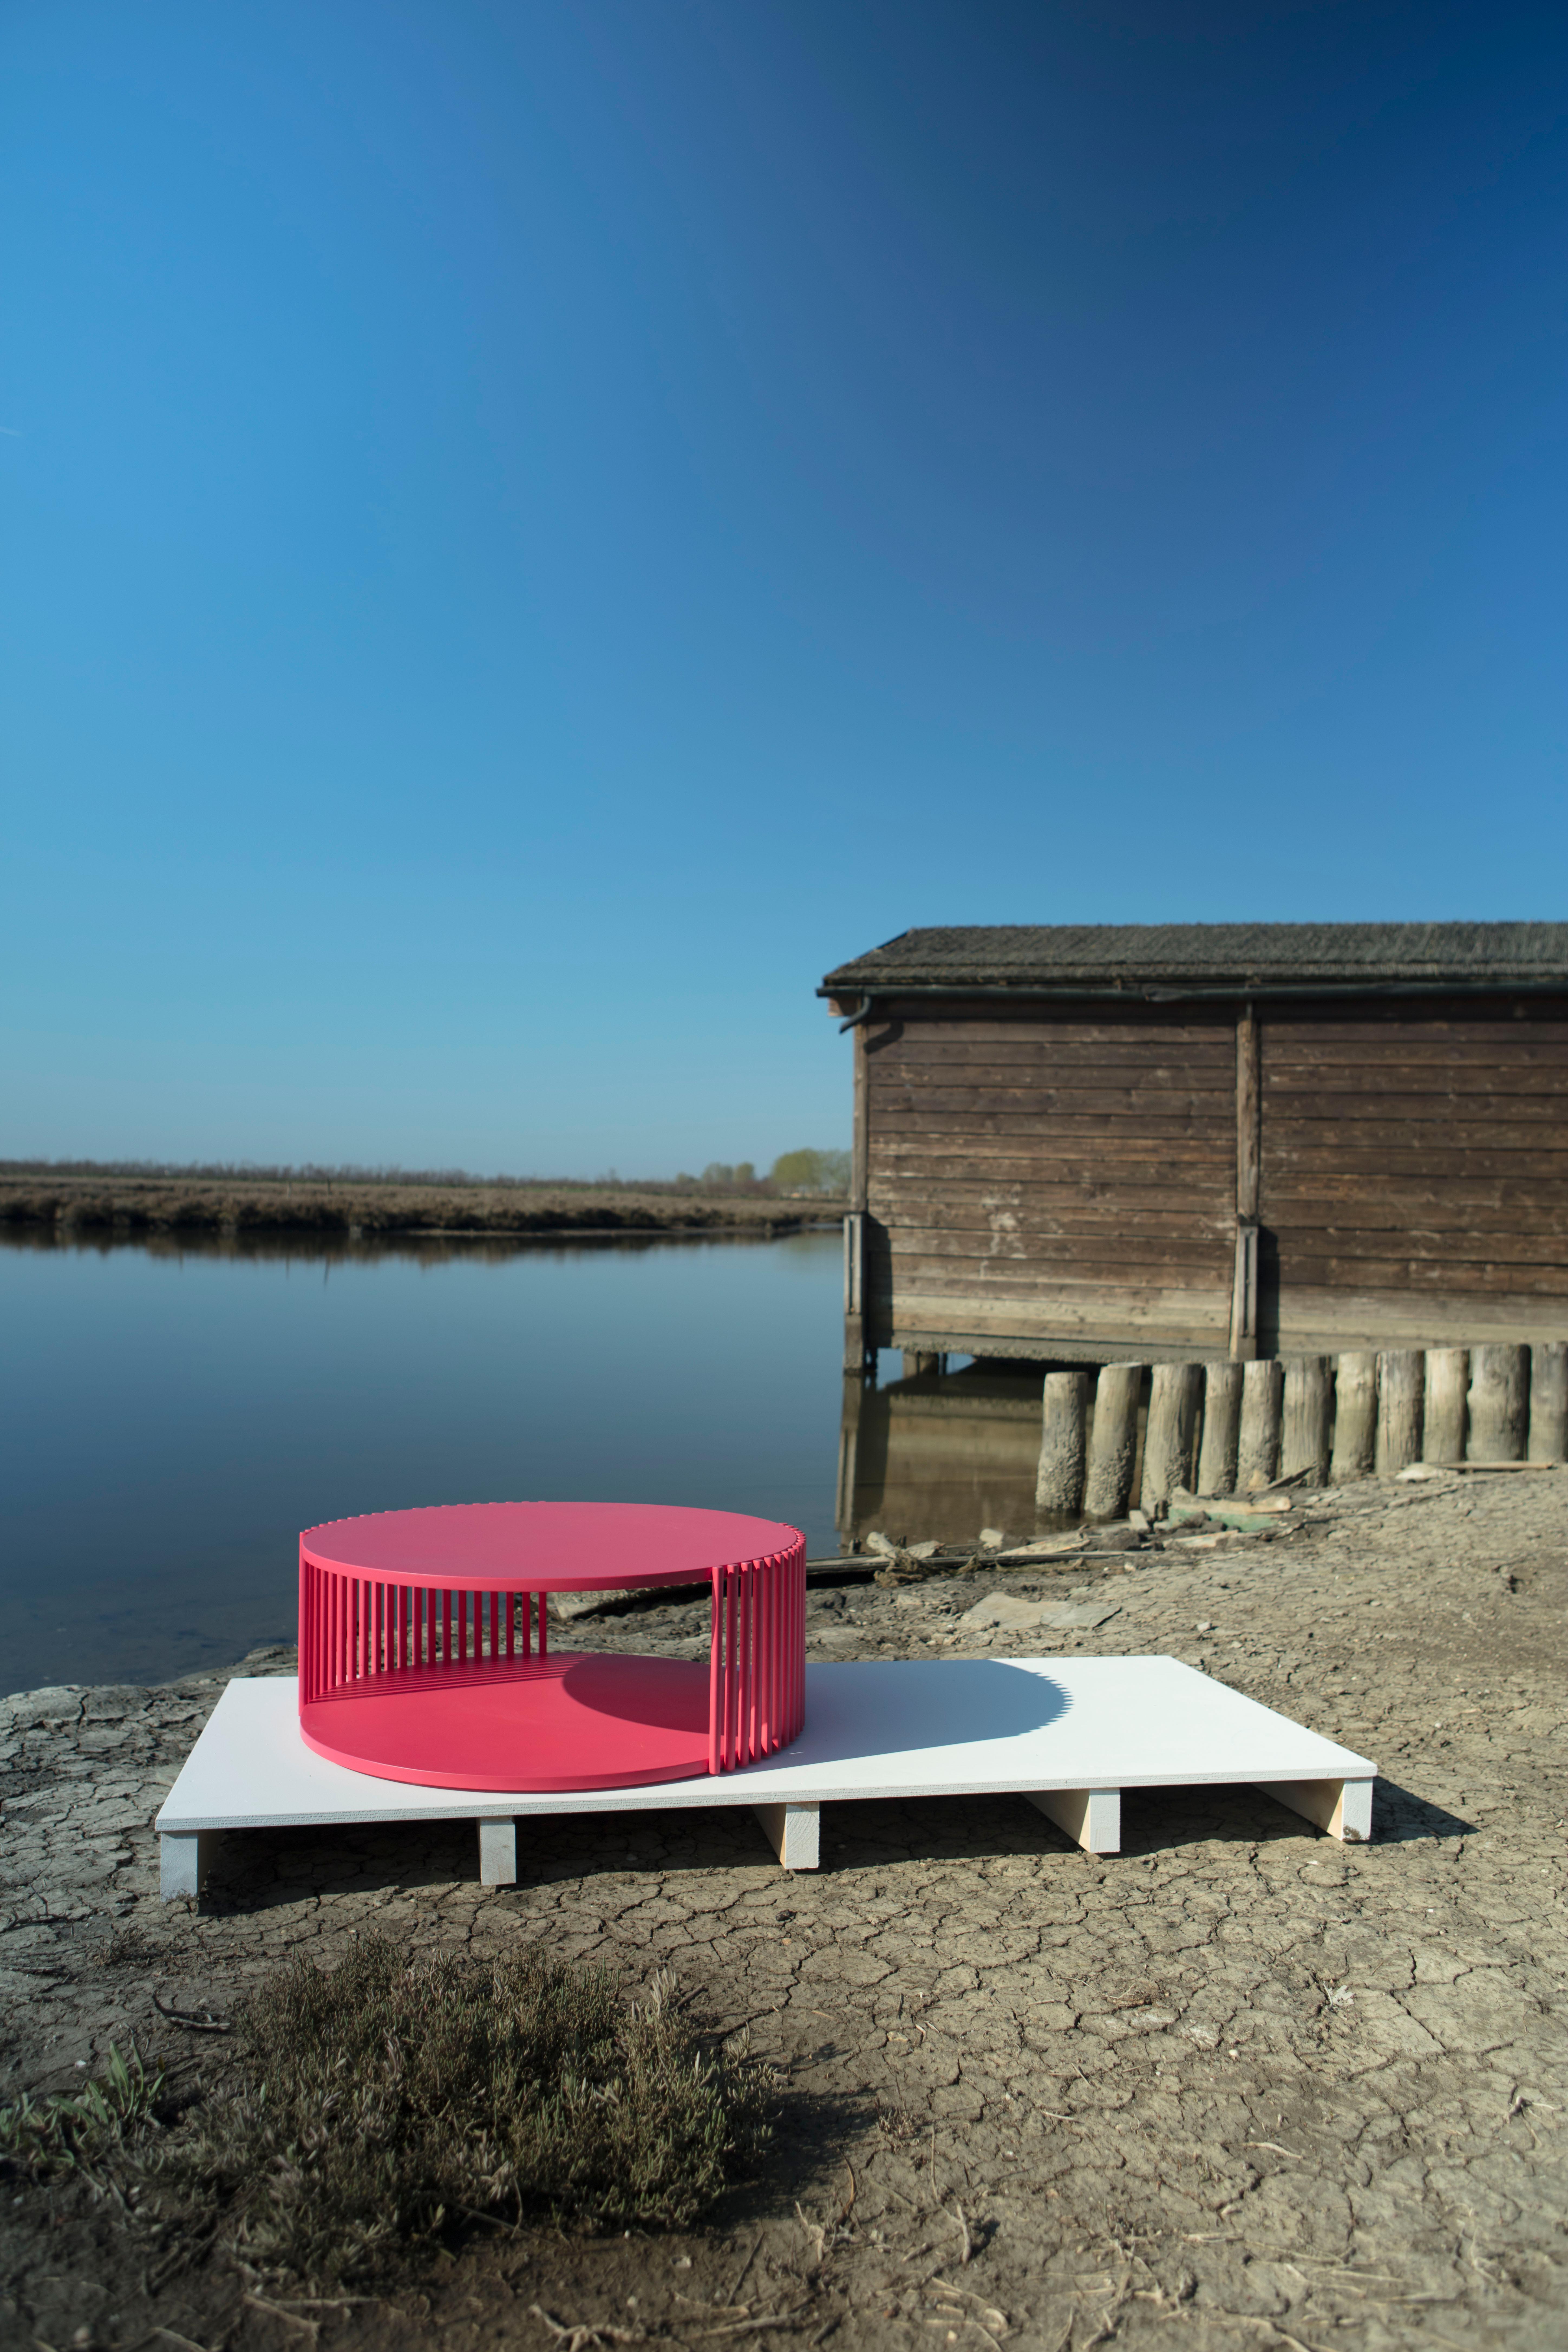 Venice, the floating city, with its urban system based on a myriad of poles
immersed in the water, provides the inspiration for a collection of furnishings
consisting of circular tops, which, depending on the point of view, seem
to rest on slender